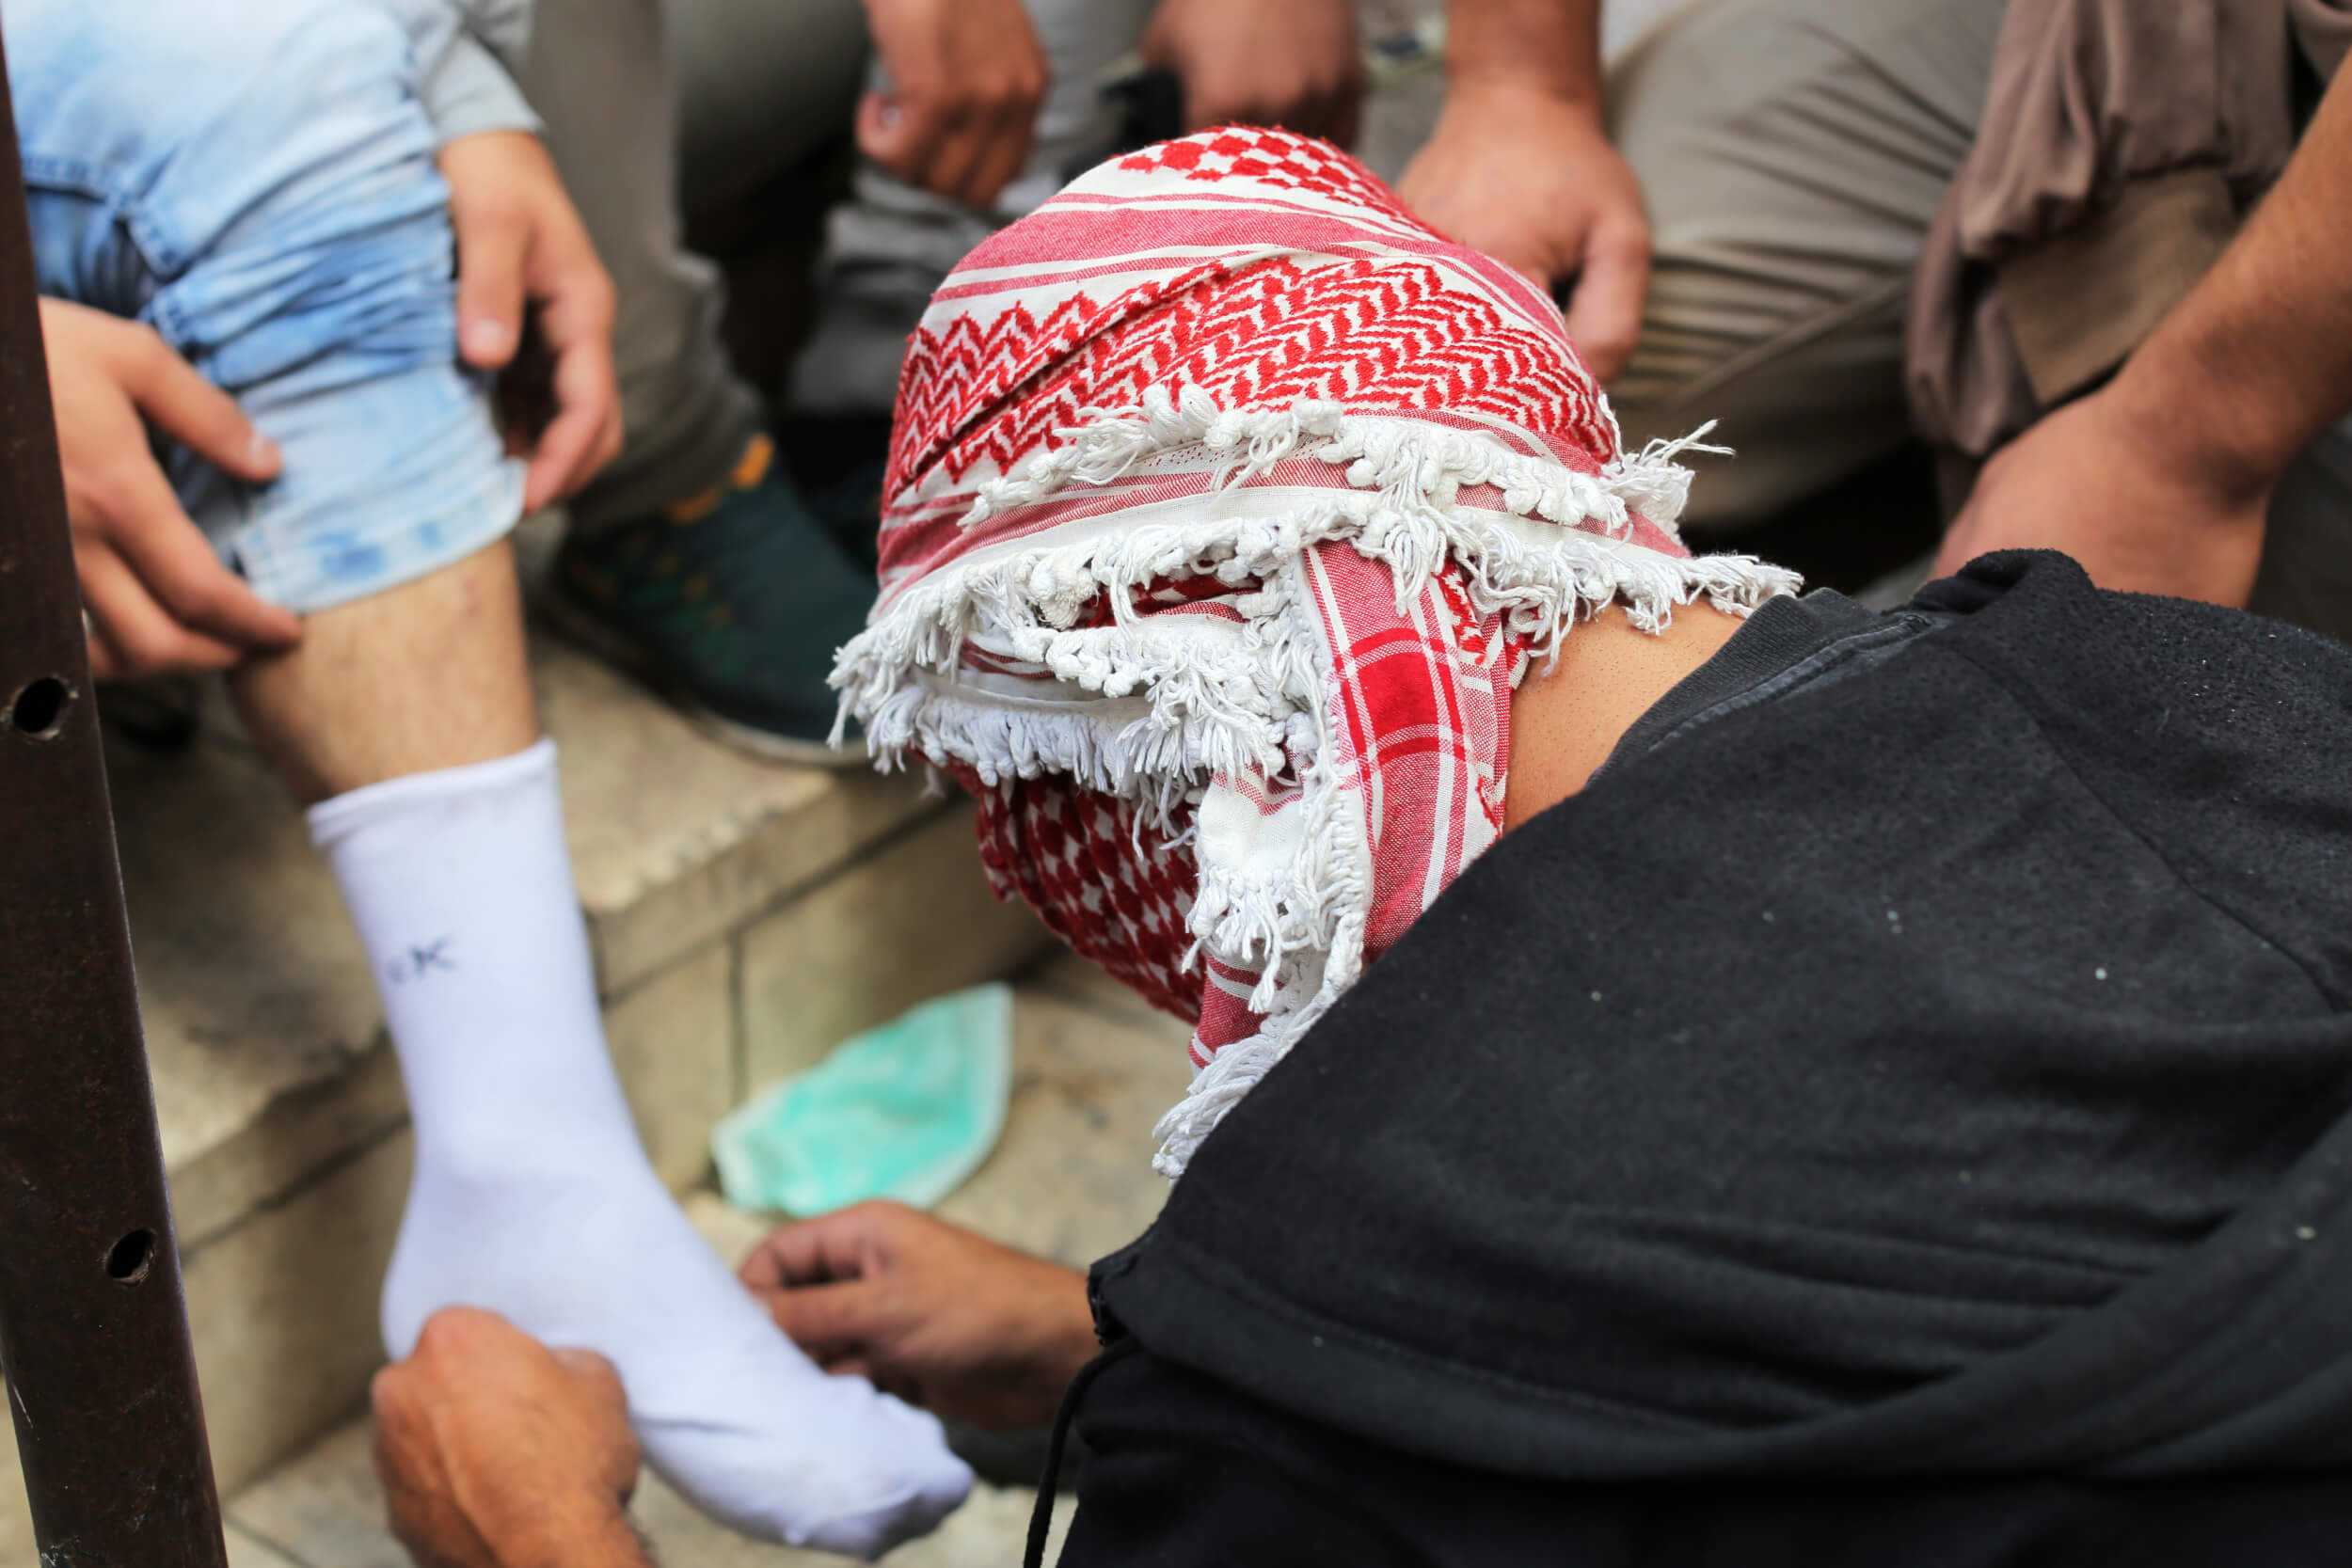 One protester examines the leg of another after he was hit with a tear gas canister during clashes. A hit with a canister can break the skin, cause bruising and chemical burns. (Photo: Abed al Qaisi)